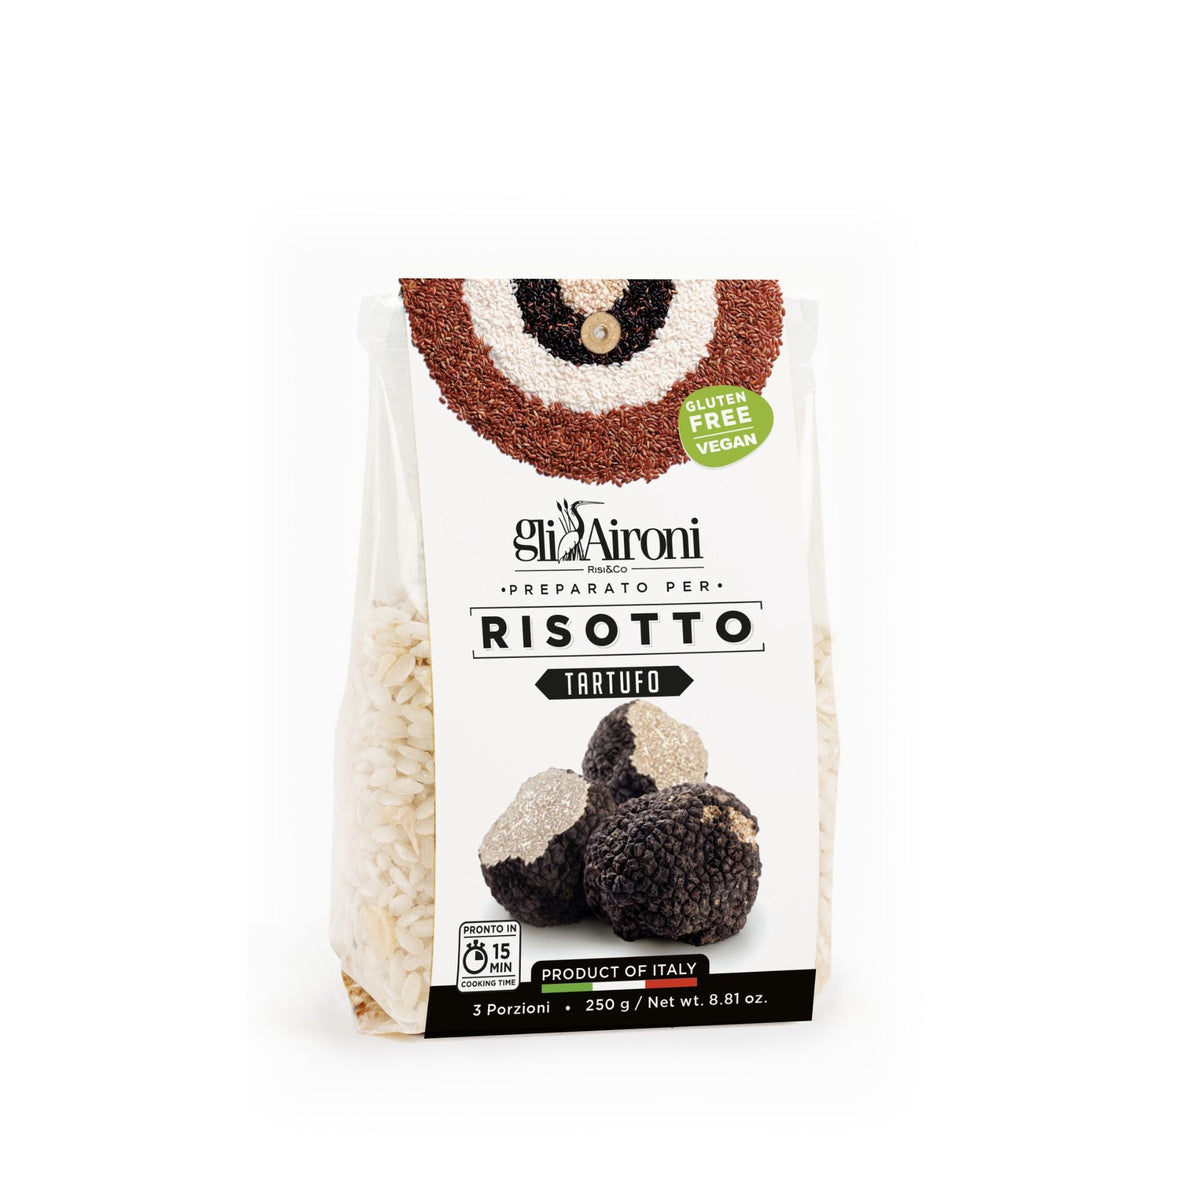 Gli Aironi Truffle Risotto 250g (Bag)  | Imported and distributed in the UK by Just Gourmet Foods